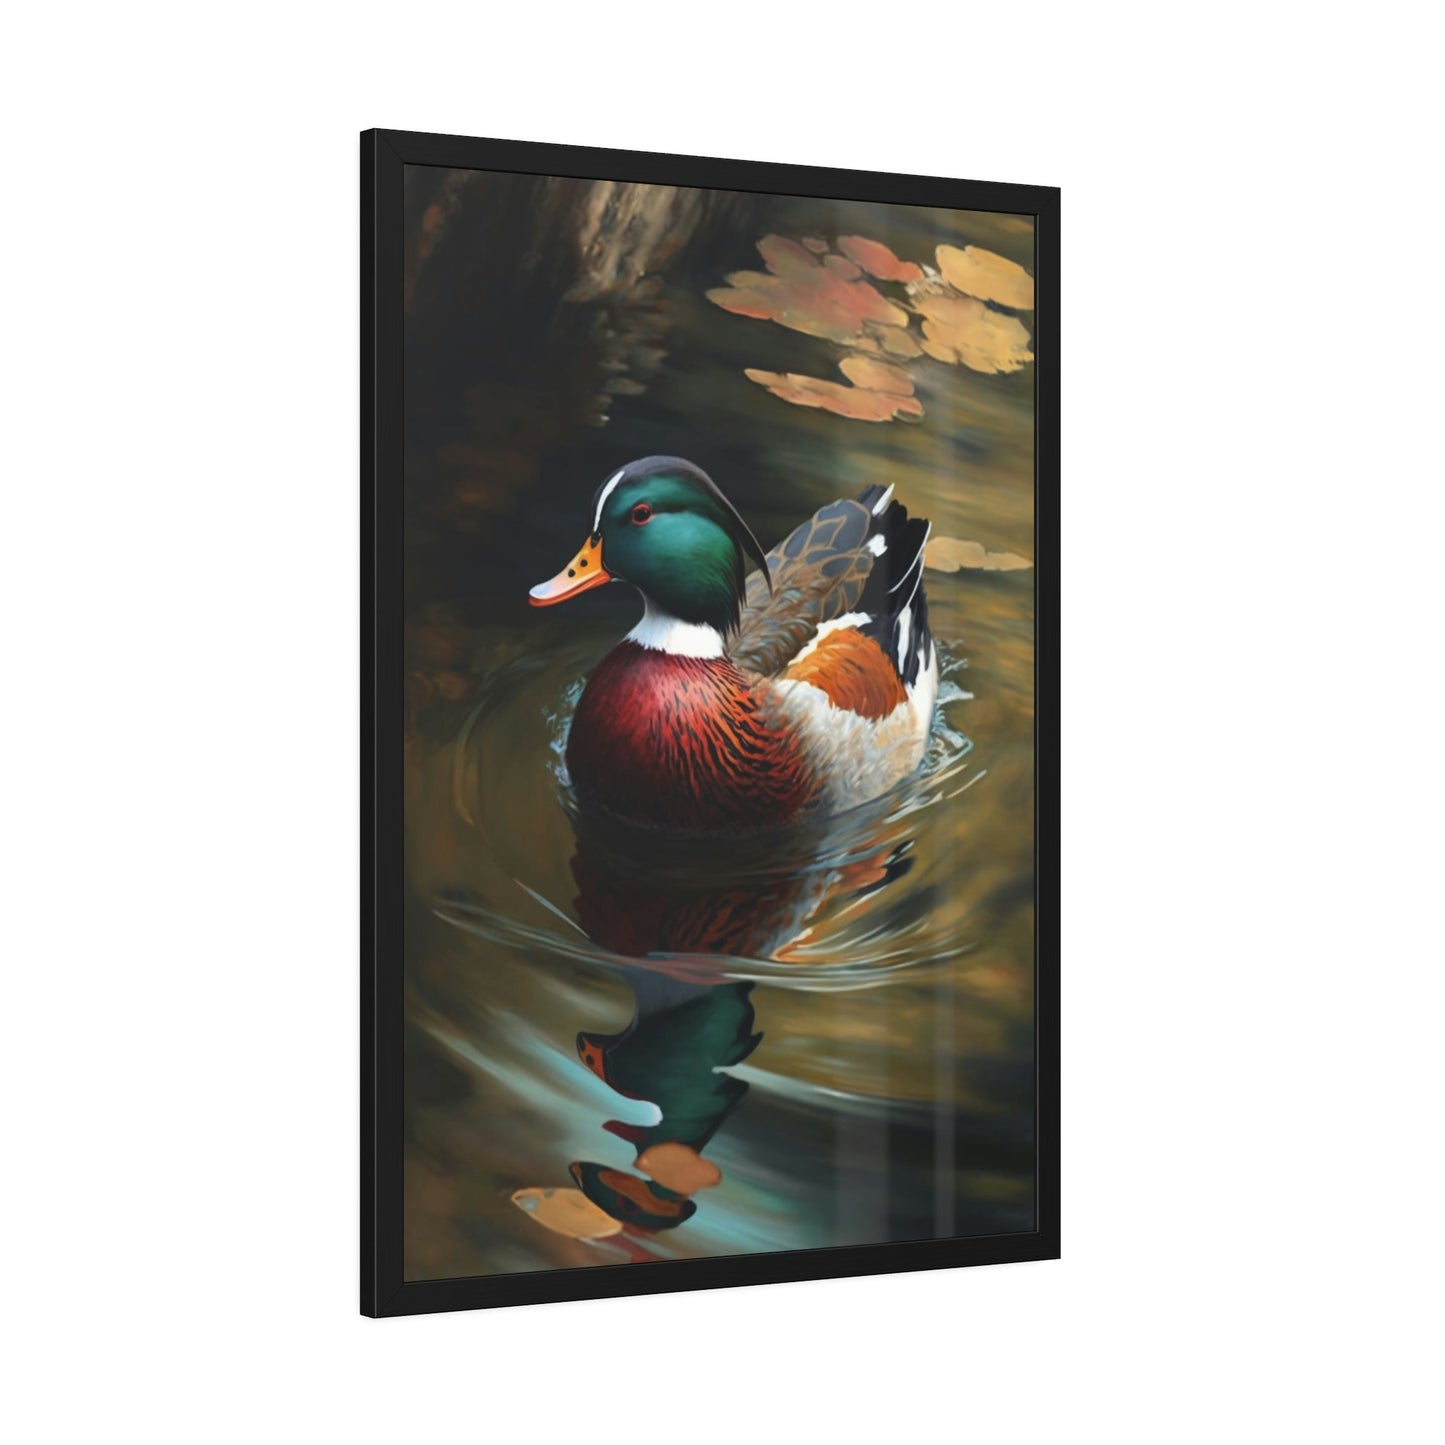 Reflections of Nature: An Artistic Rendering of Ducks